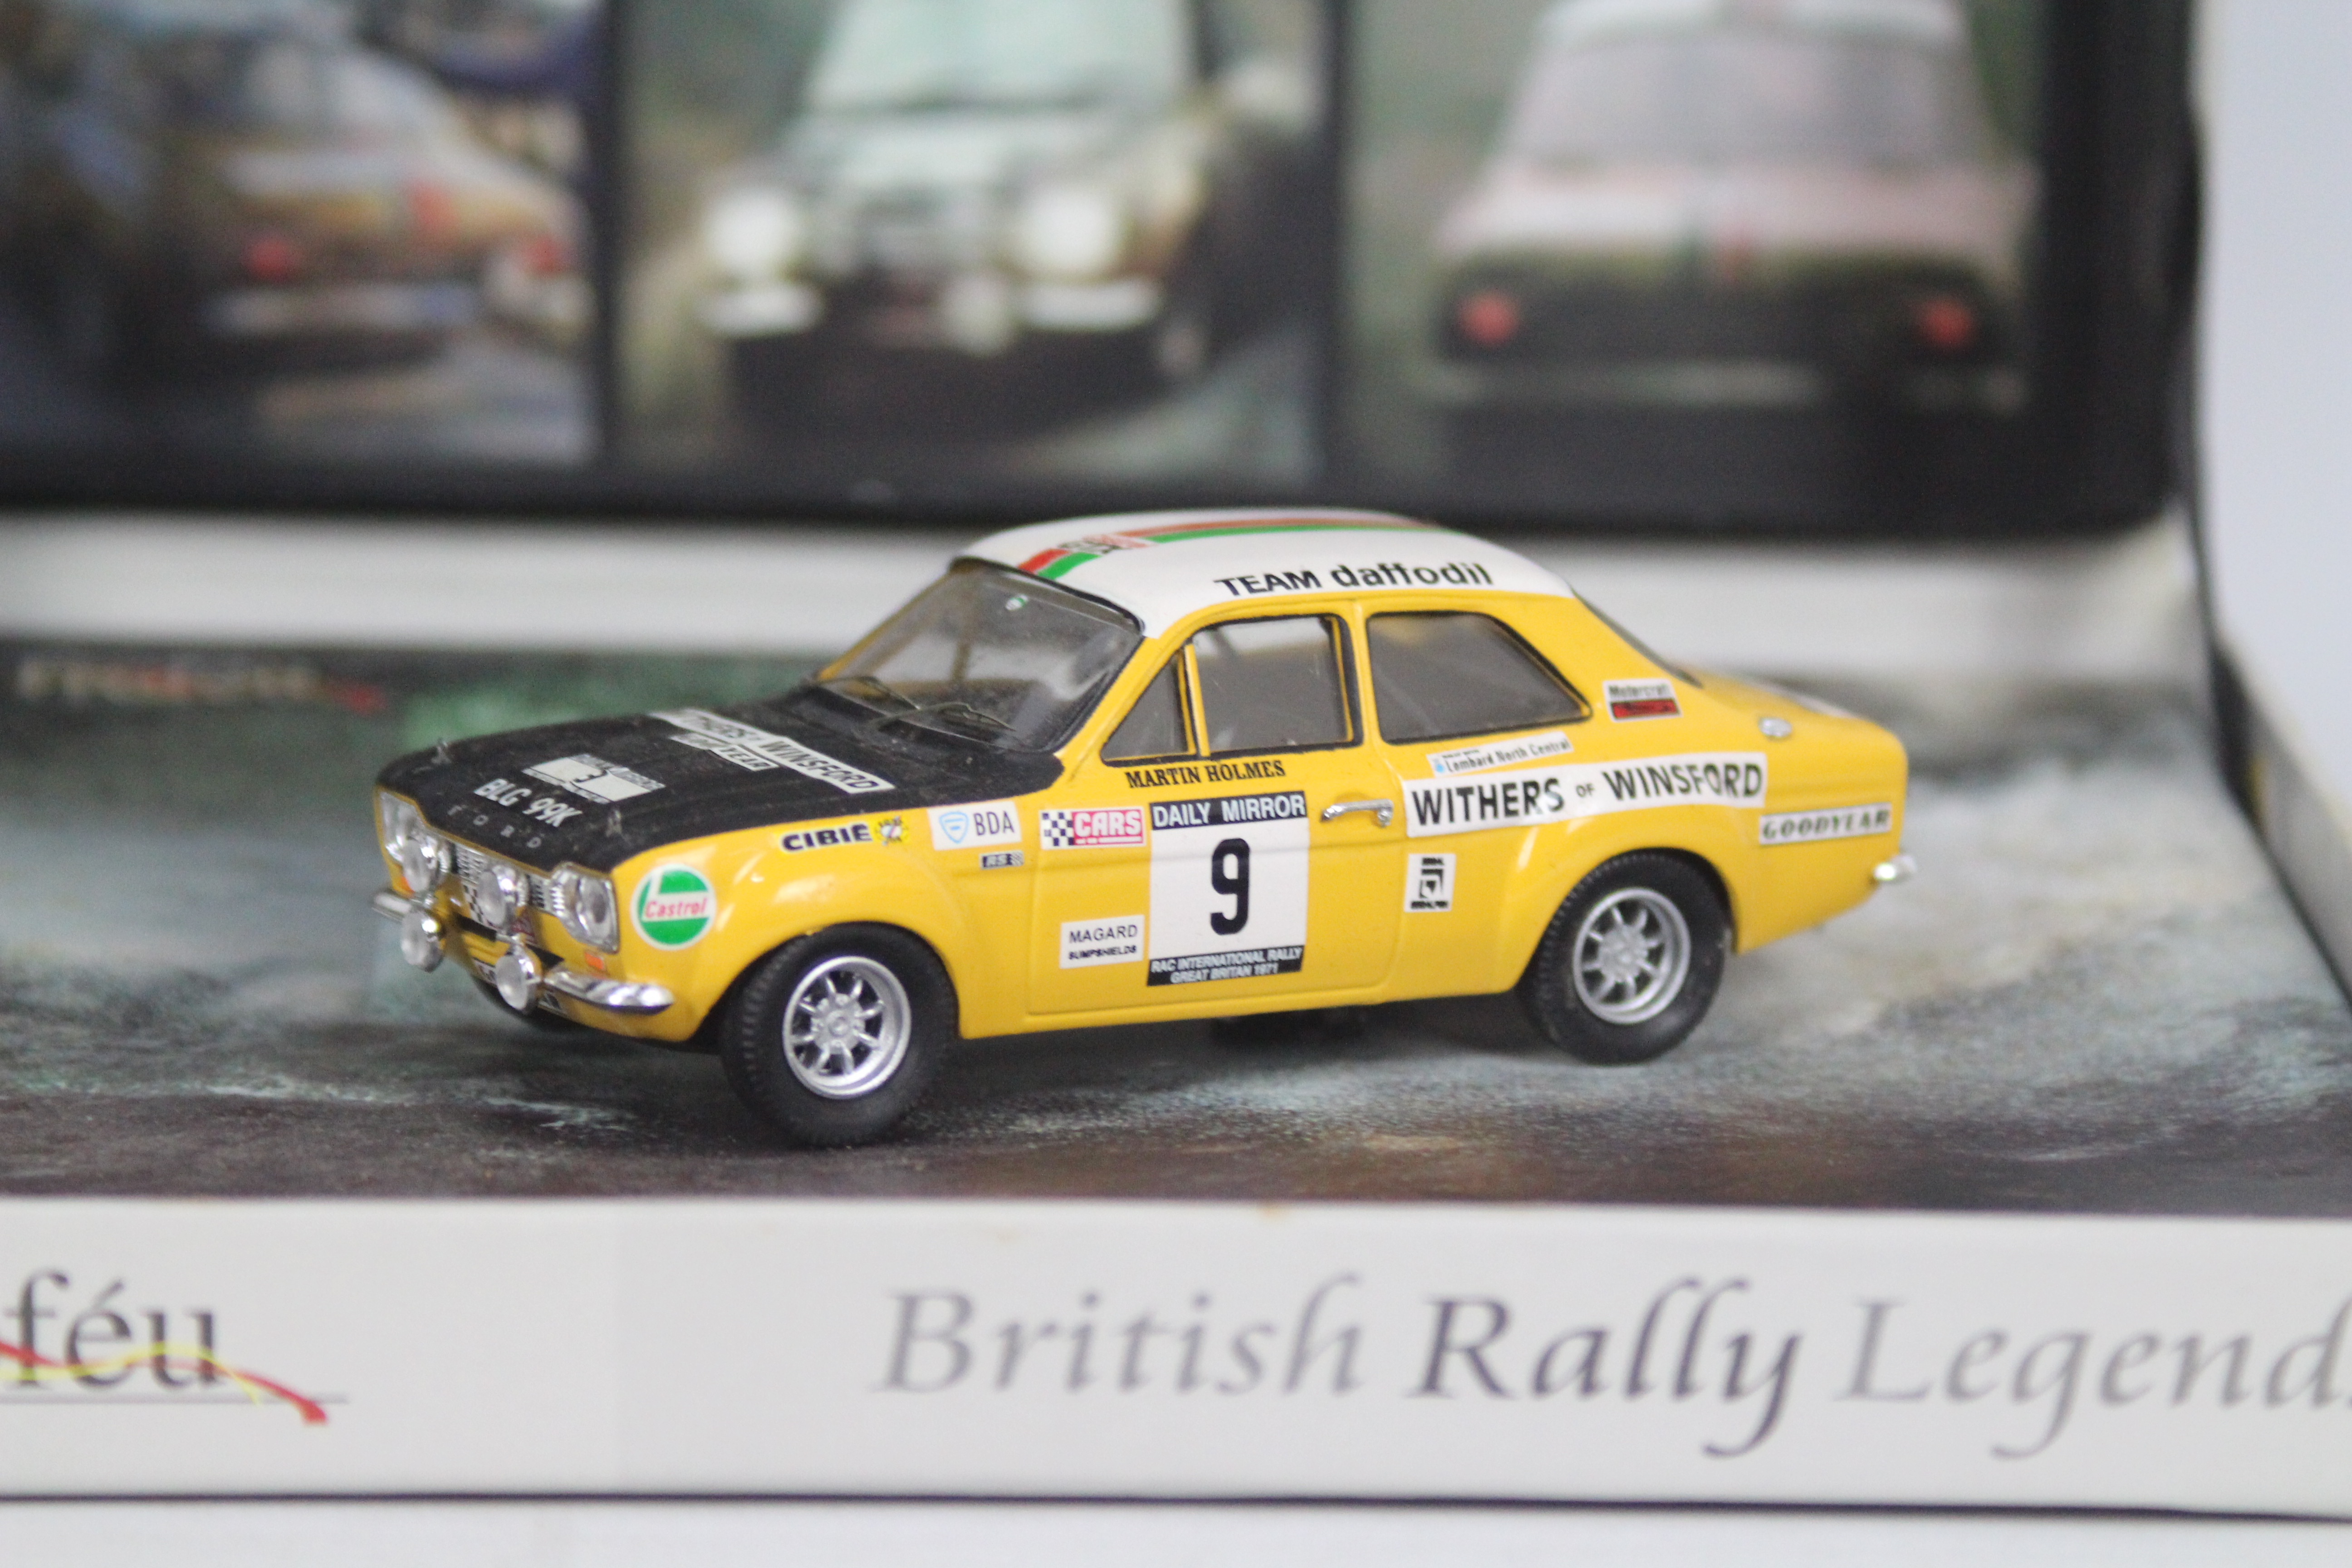 Trofeu - 2 x limited edition Ford Escort Rally cars in 1:43 scale, - Image 3 of 4